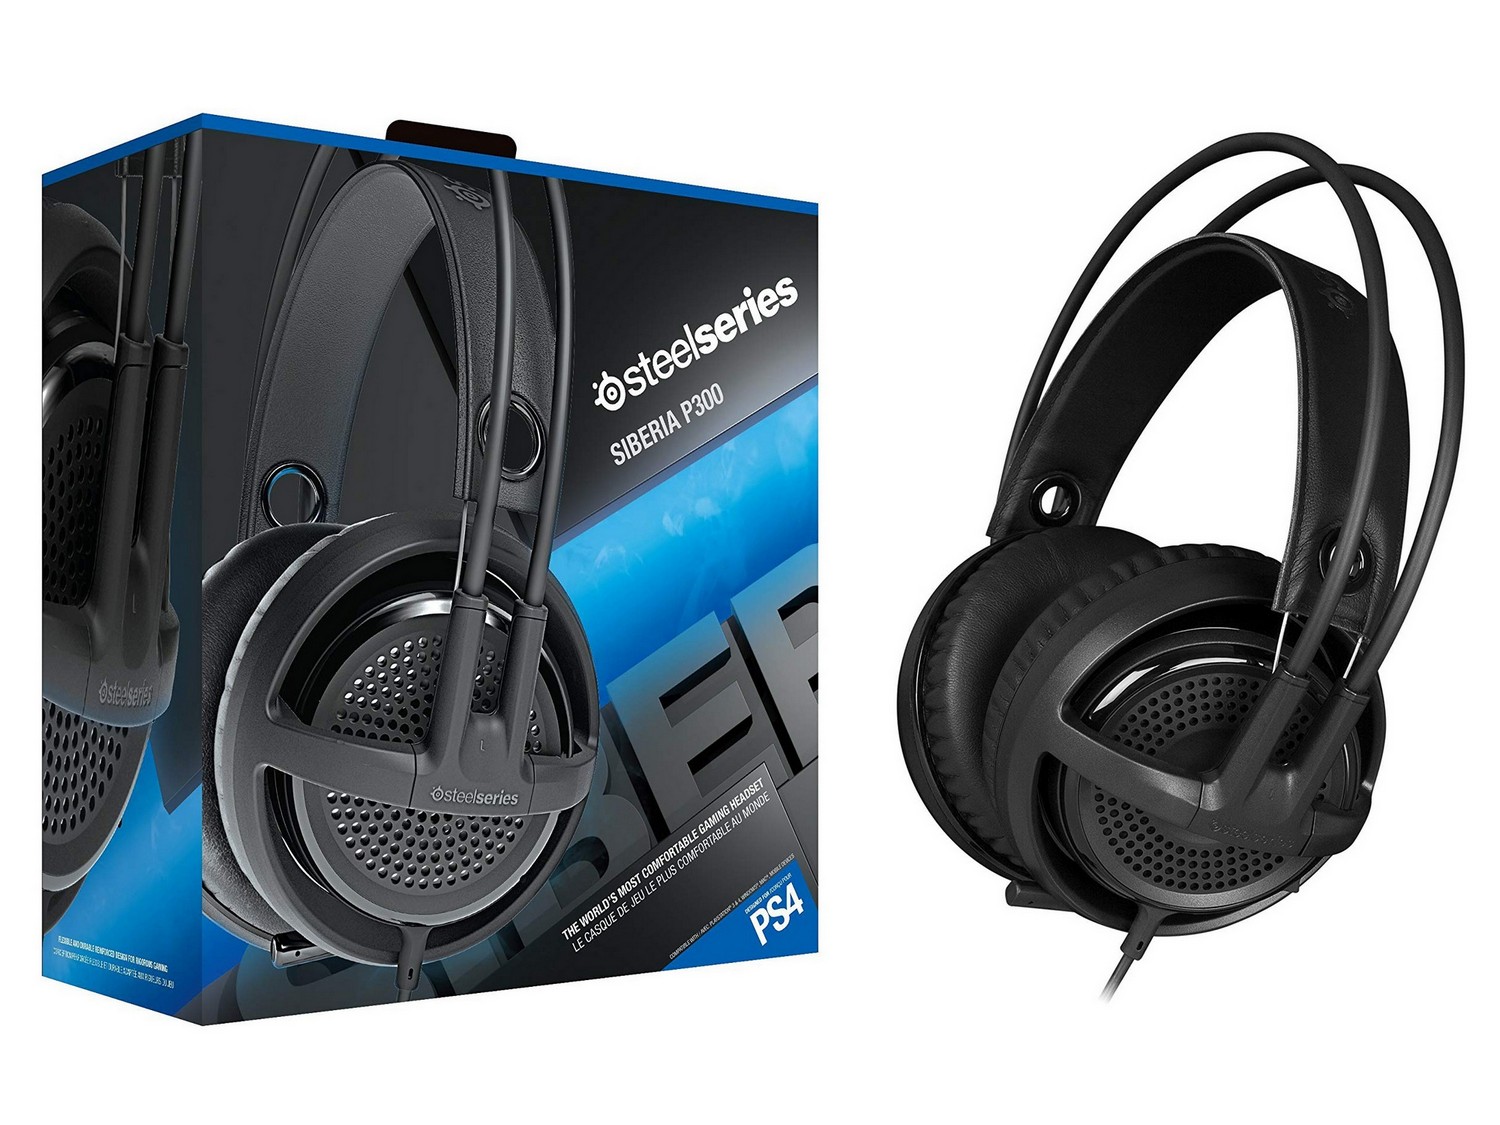 SteelSeries Siberia P300 Wired Headset - Black (PS4)